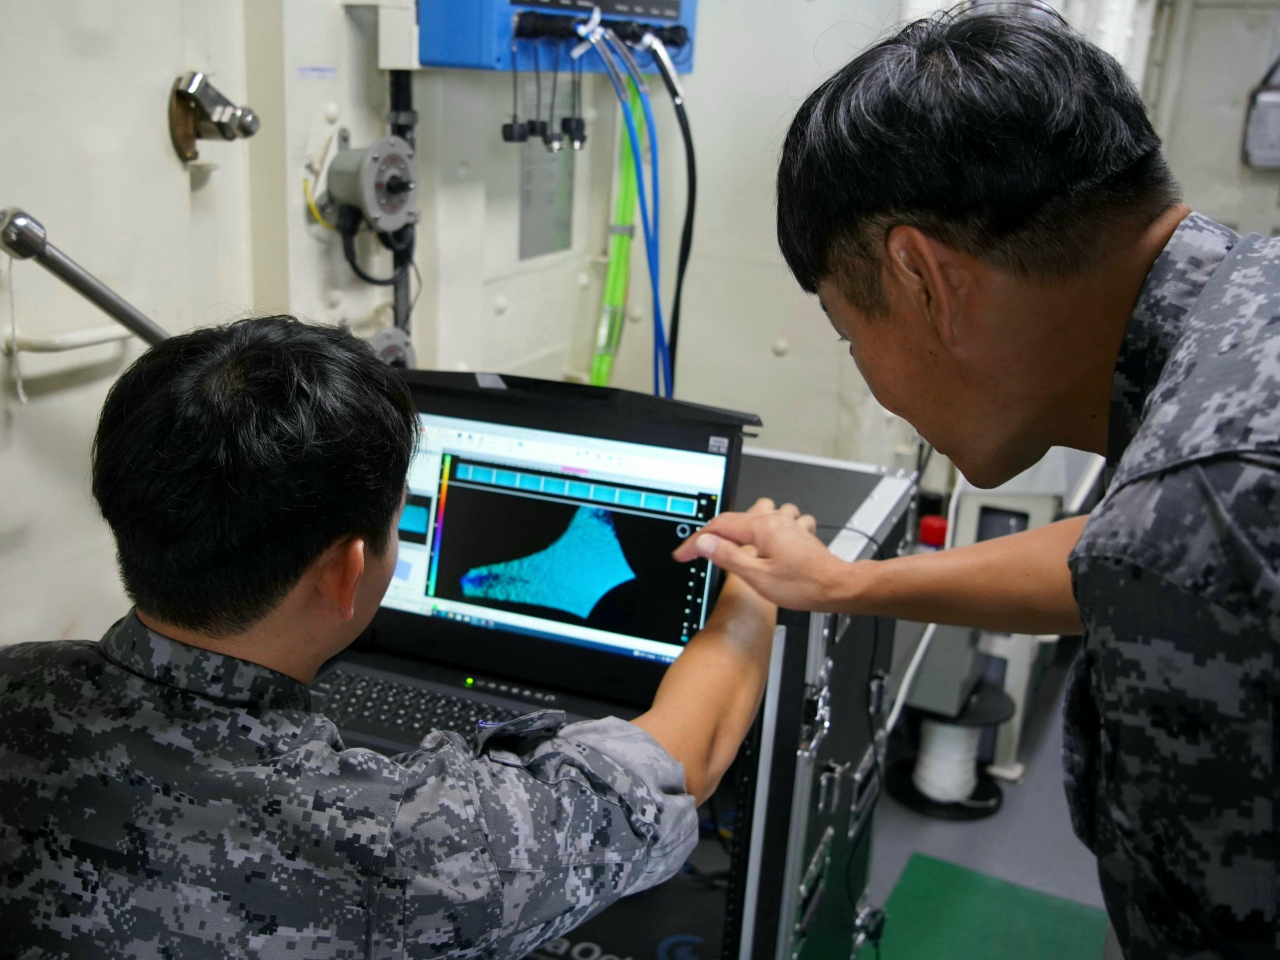 The joint South Korean-US underwater search operation team is analyzing and discussing data detected by the Sound Navigation and Ranging (SONAR) system. (Photo courtesy of the Ministry of National Defense Agency for Killed in Action Recovery Identification)